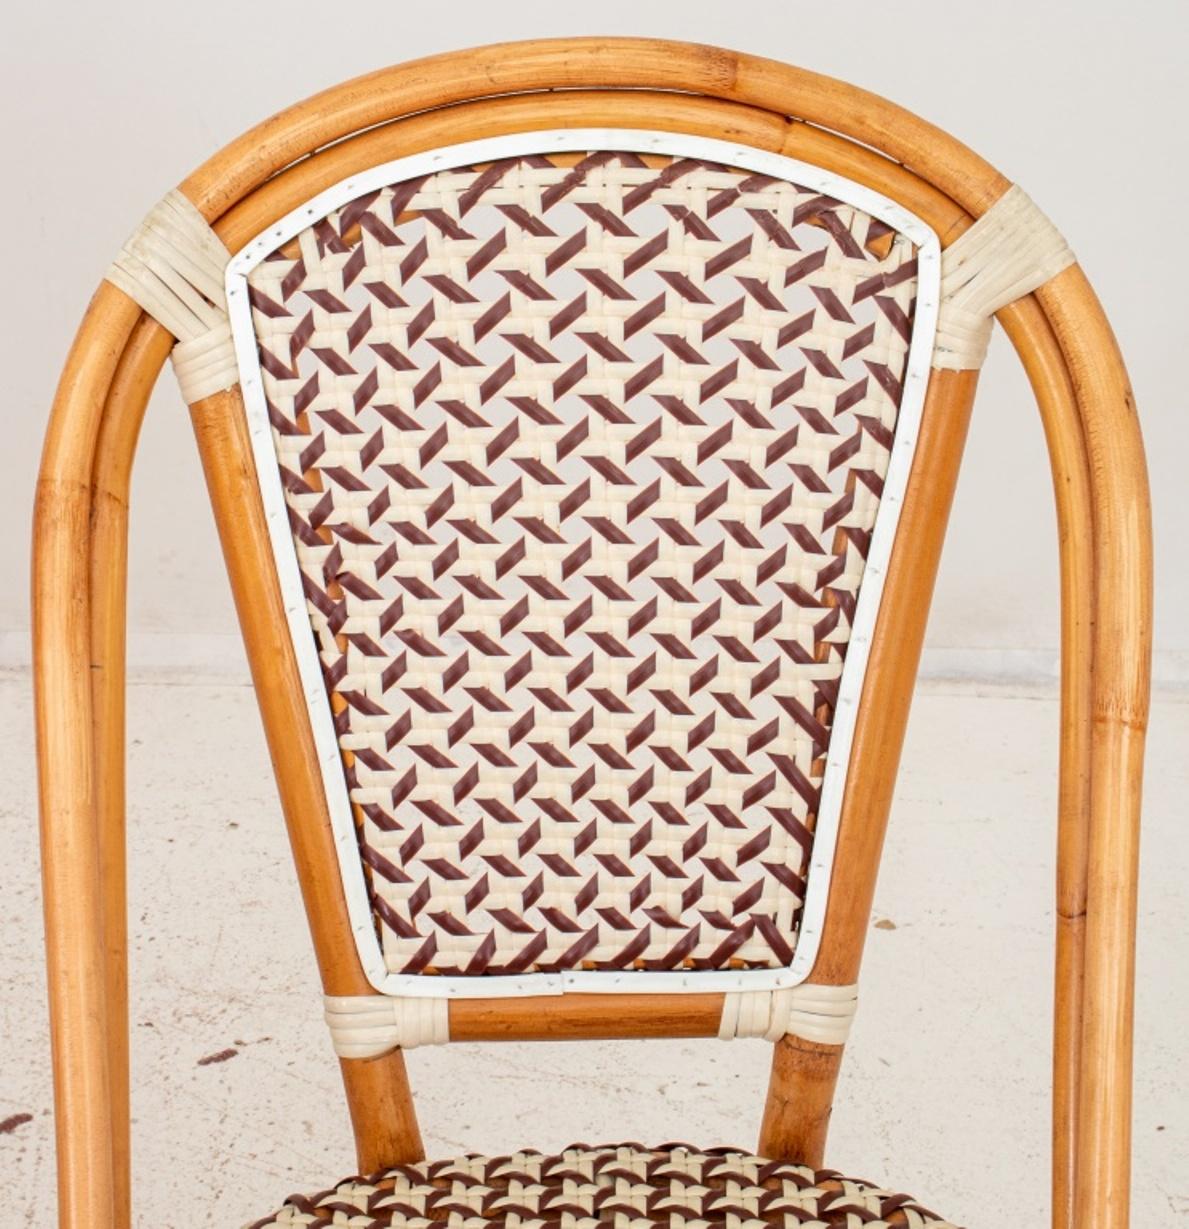 Set of four French Parisian Bistro style bentwood Chairs, the arched woven plastic back and seat, raised on bamboo legs, joined by an X-form stretcher, circa late twentieth century. Set of Four.

Dimensions: 34.5